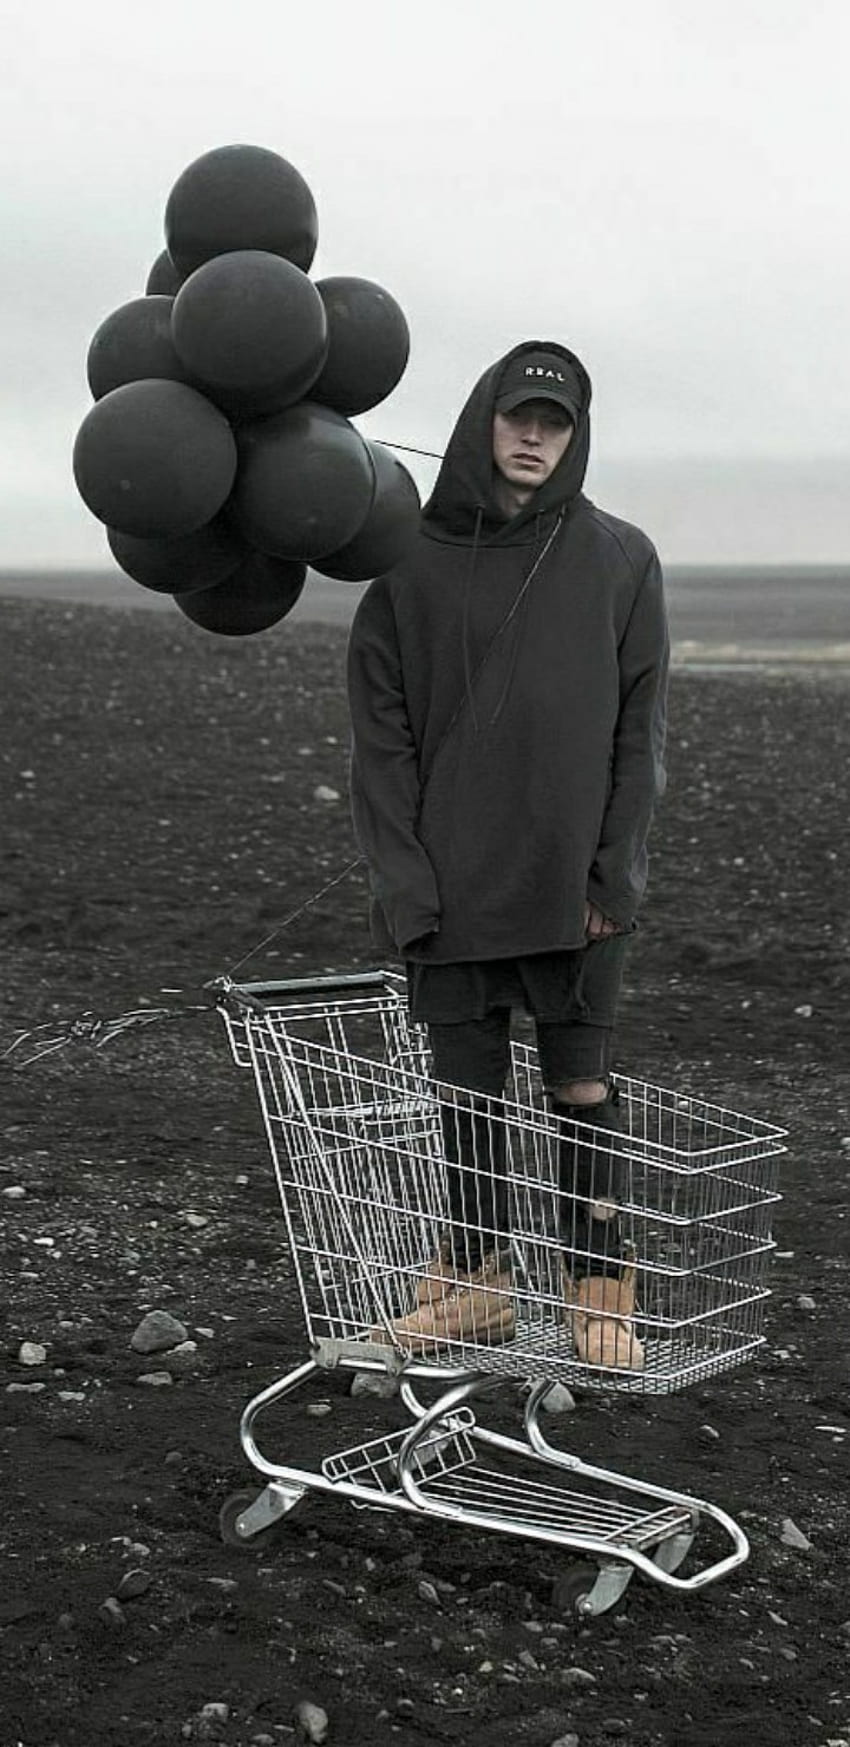 NF, Nate, rap, shopping_cart, standing, Nathan, music, Real, NFrealmusic, hiphop HD phone wallpaper